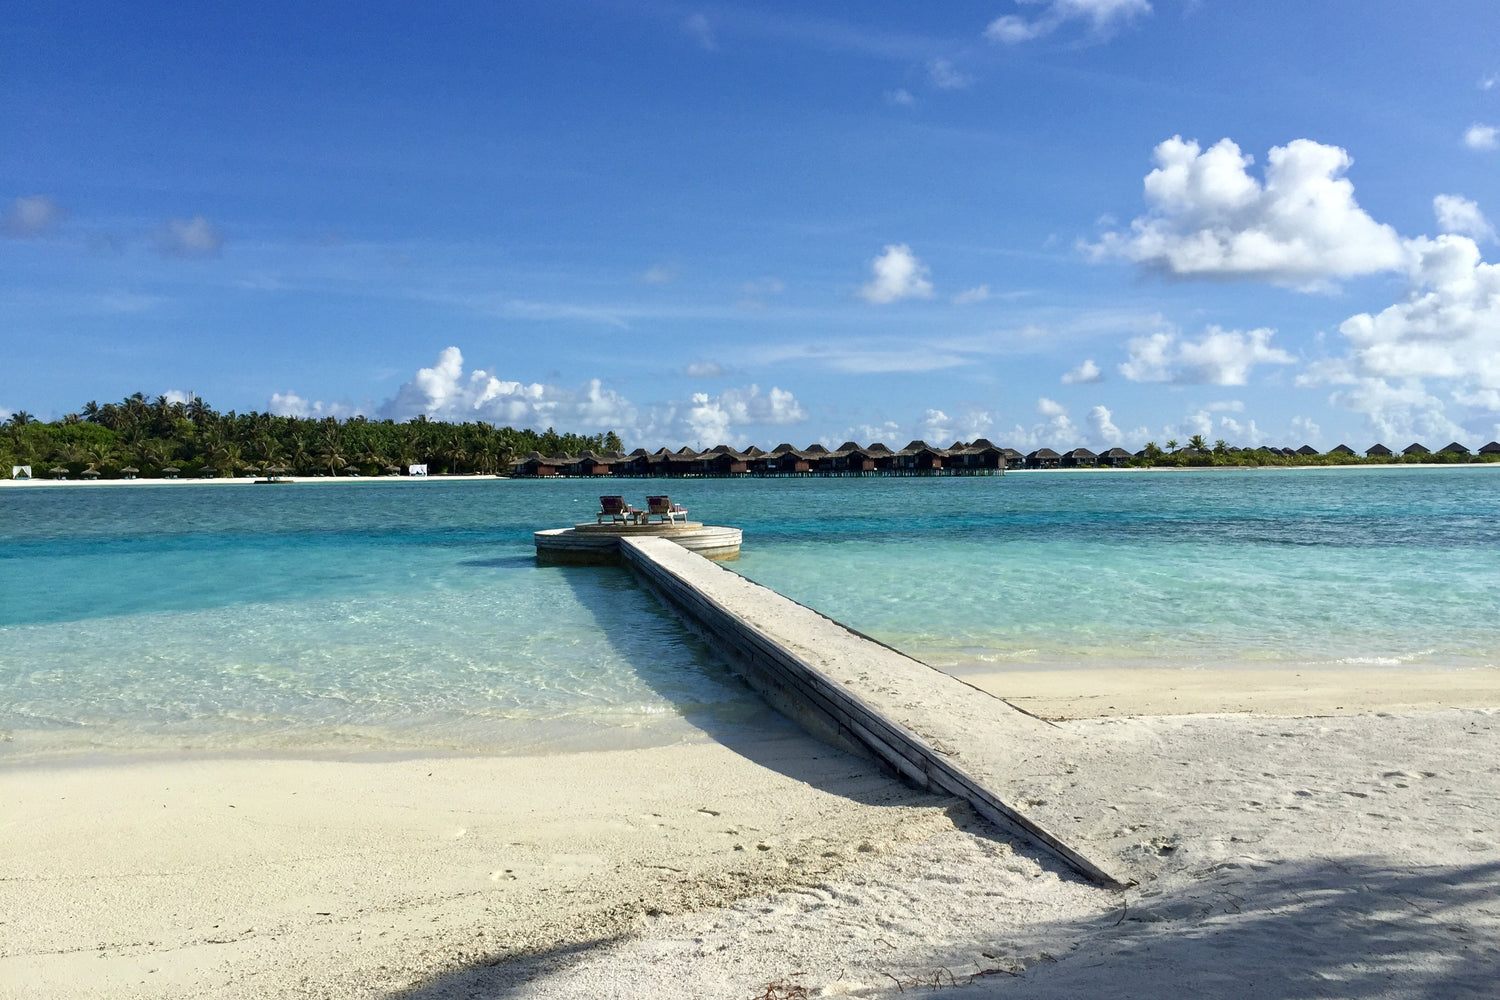 Free Video Call Backgrounds to Make You Feel Like You're Working in The Maldives